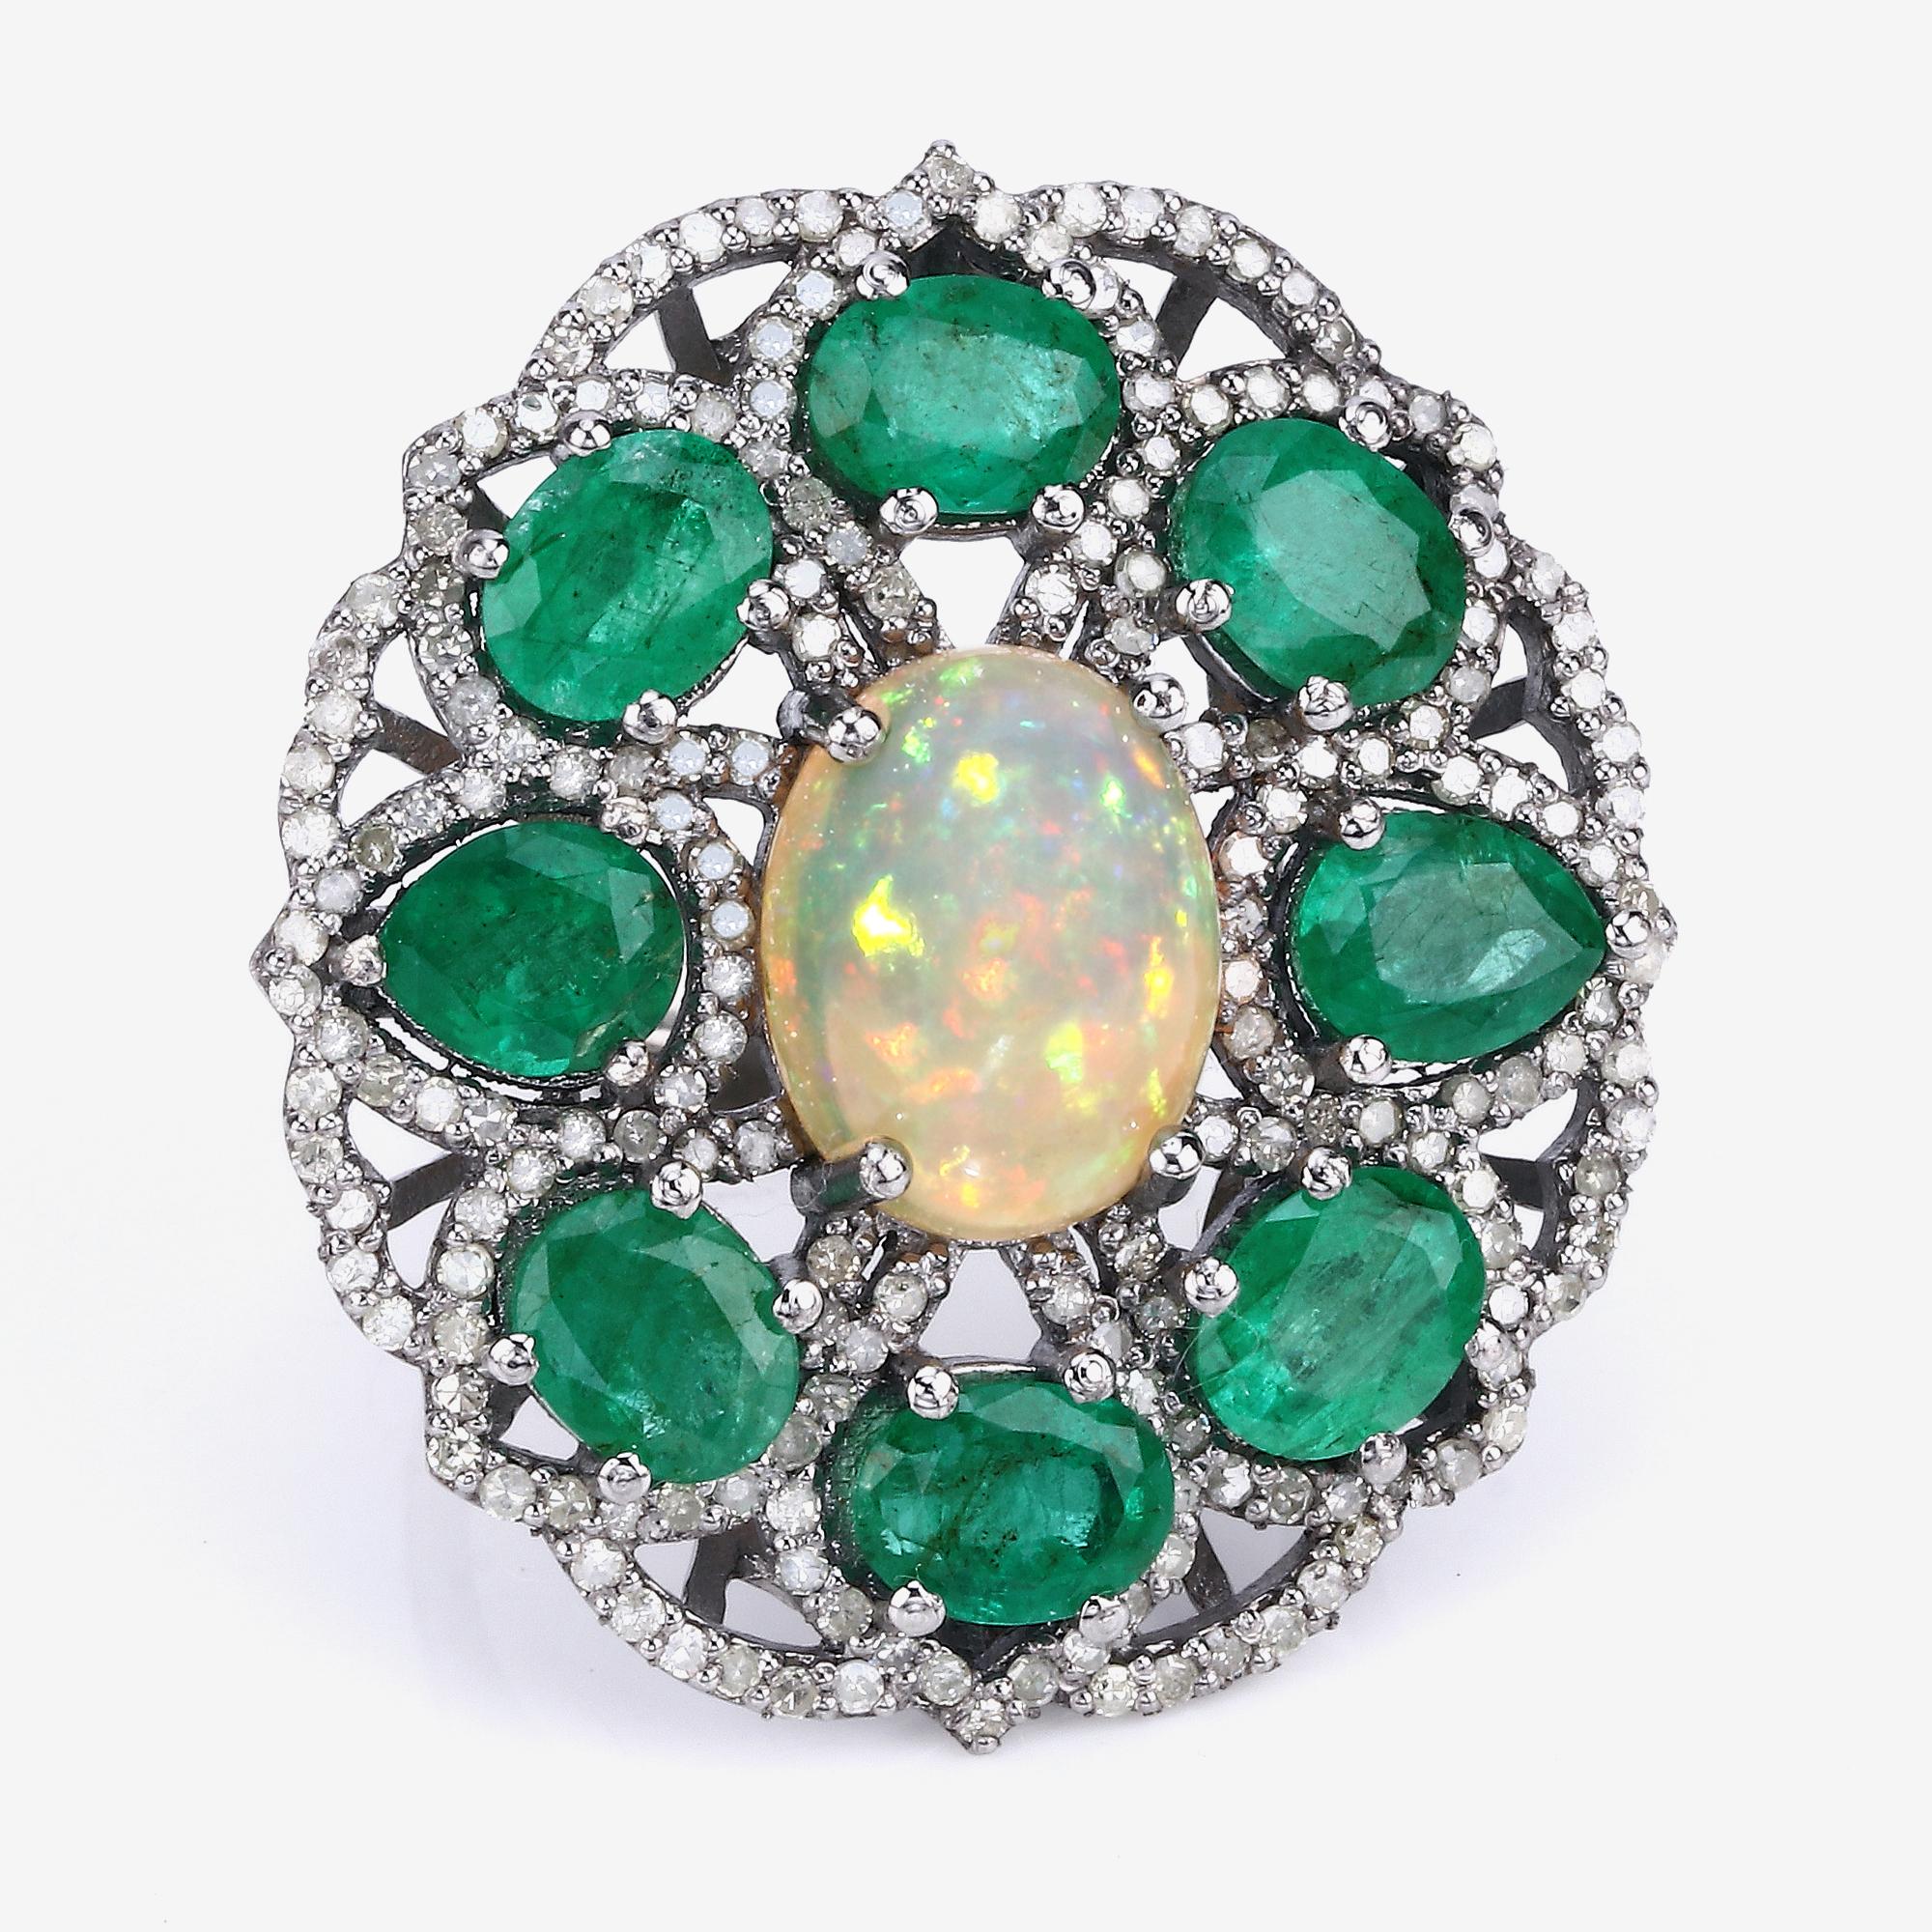 9.80cttw Ethiopian Opal, Emerald with Diamonds 1.31cttw Sterling Silver Ring In New Condition For Sale In Great Neck, NY